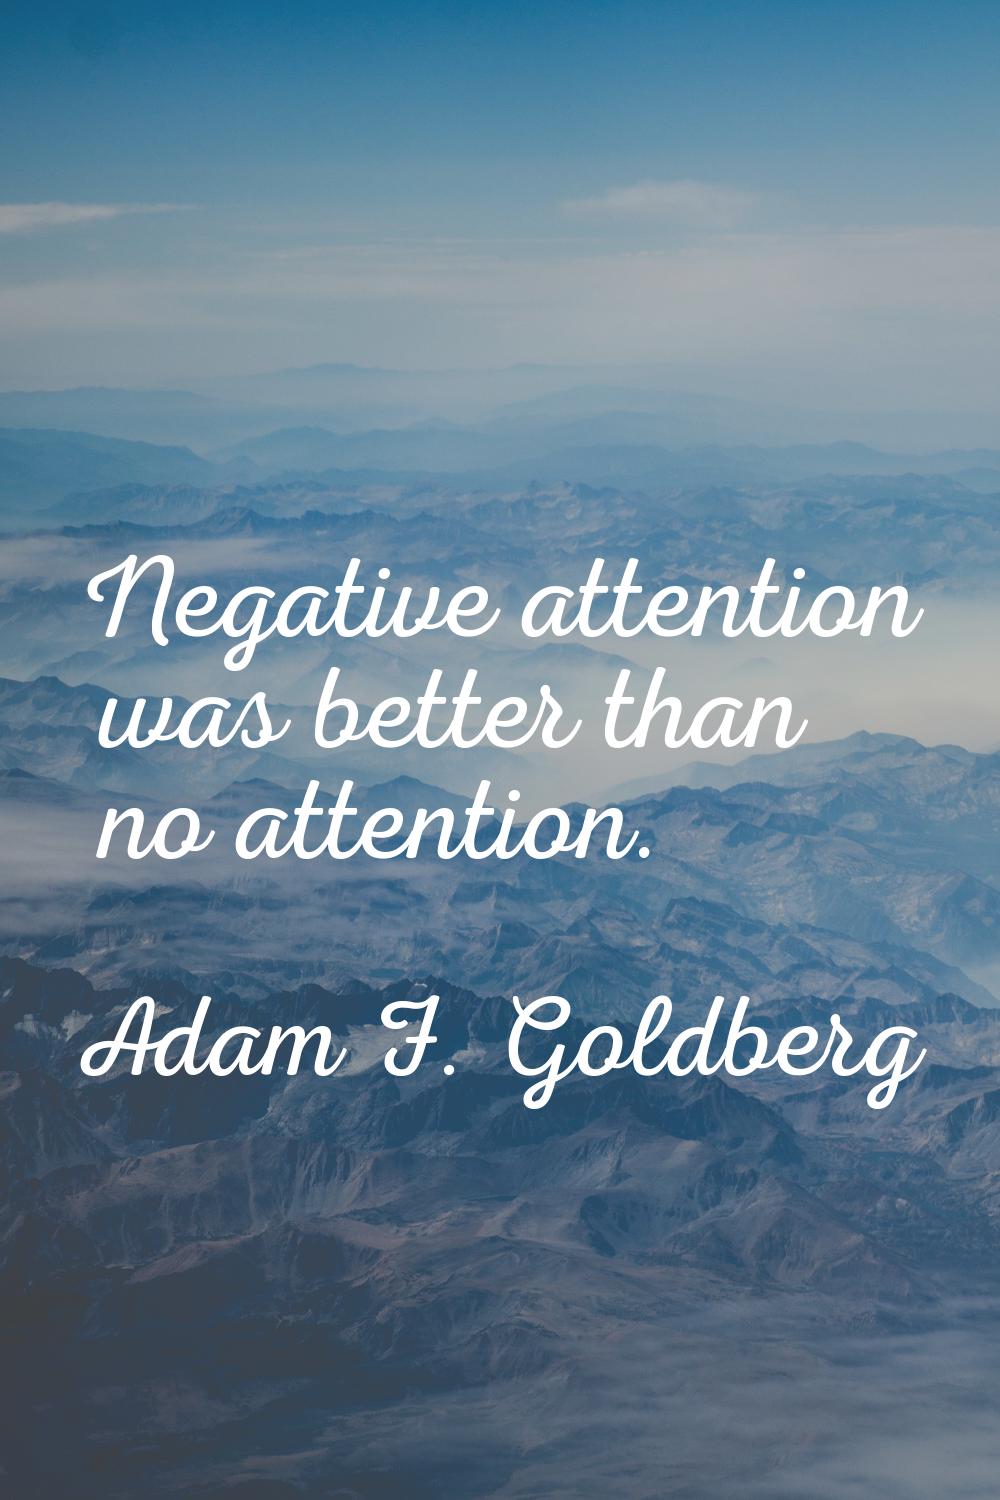 Negative attention was better than no attention.